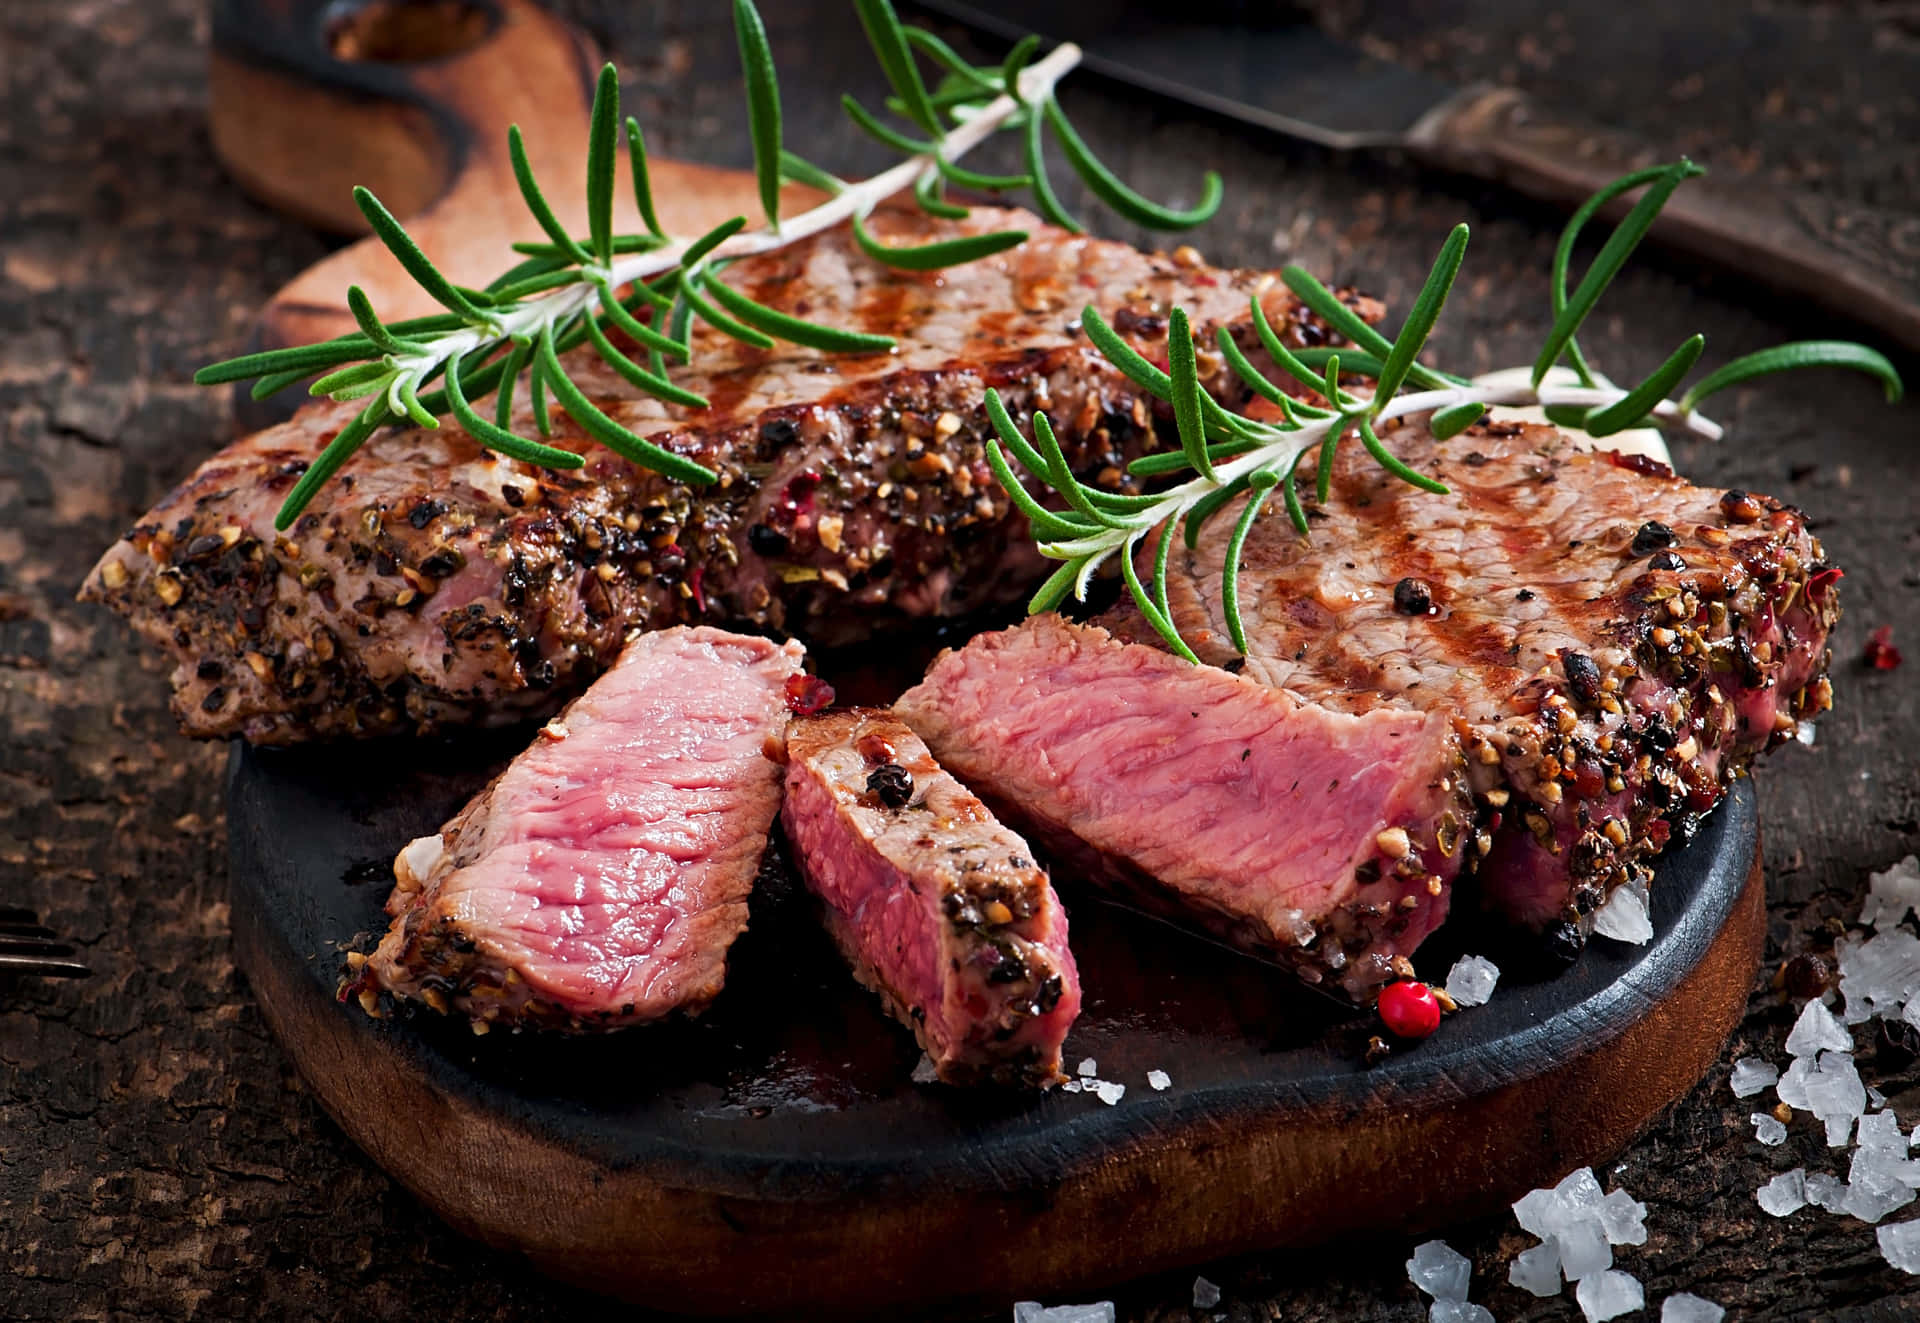 Steak On A Plate With Rosemary Sprigs